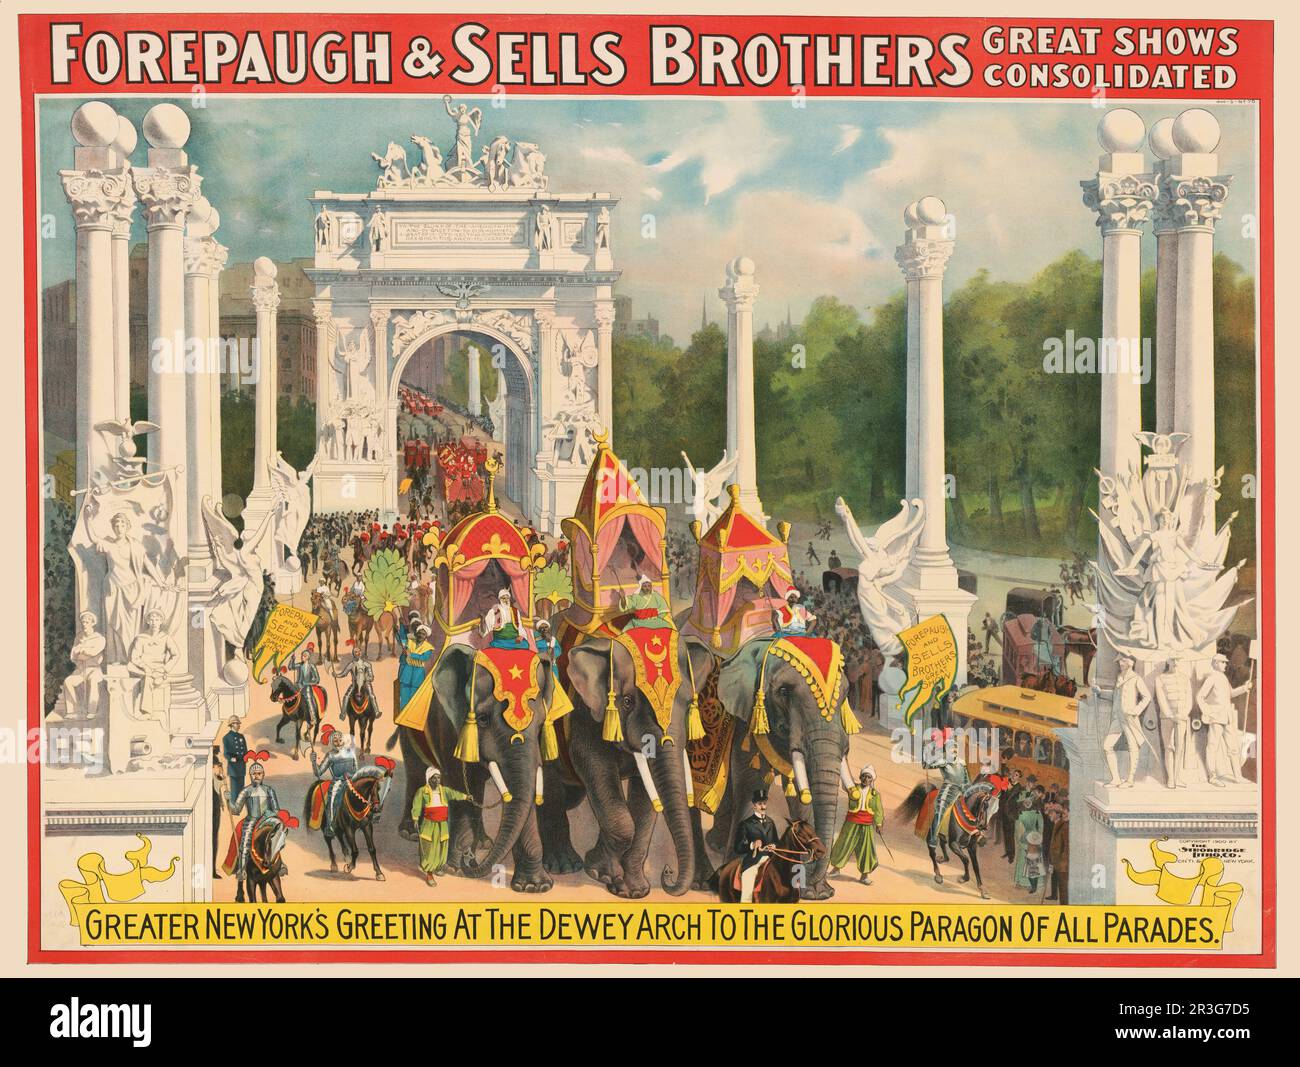 Vintage Forepaugh and Sells Brothers circus poster shows a circus parade going through Dewey Arch, circa 1900. Stock Photo